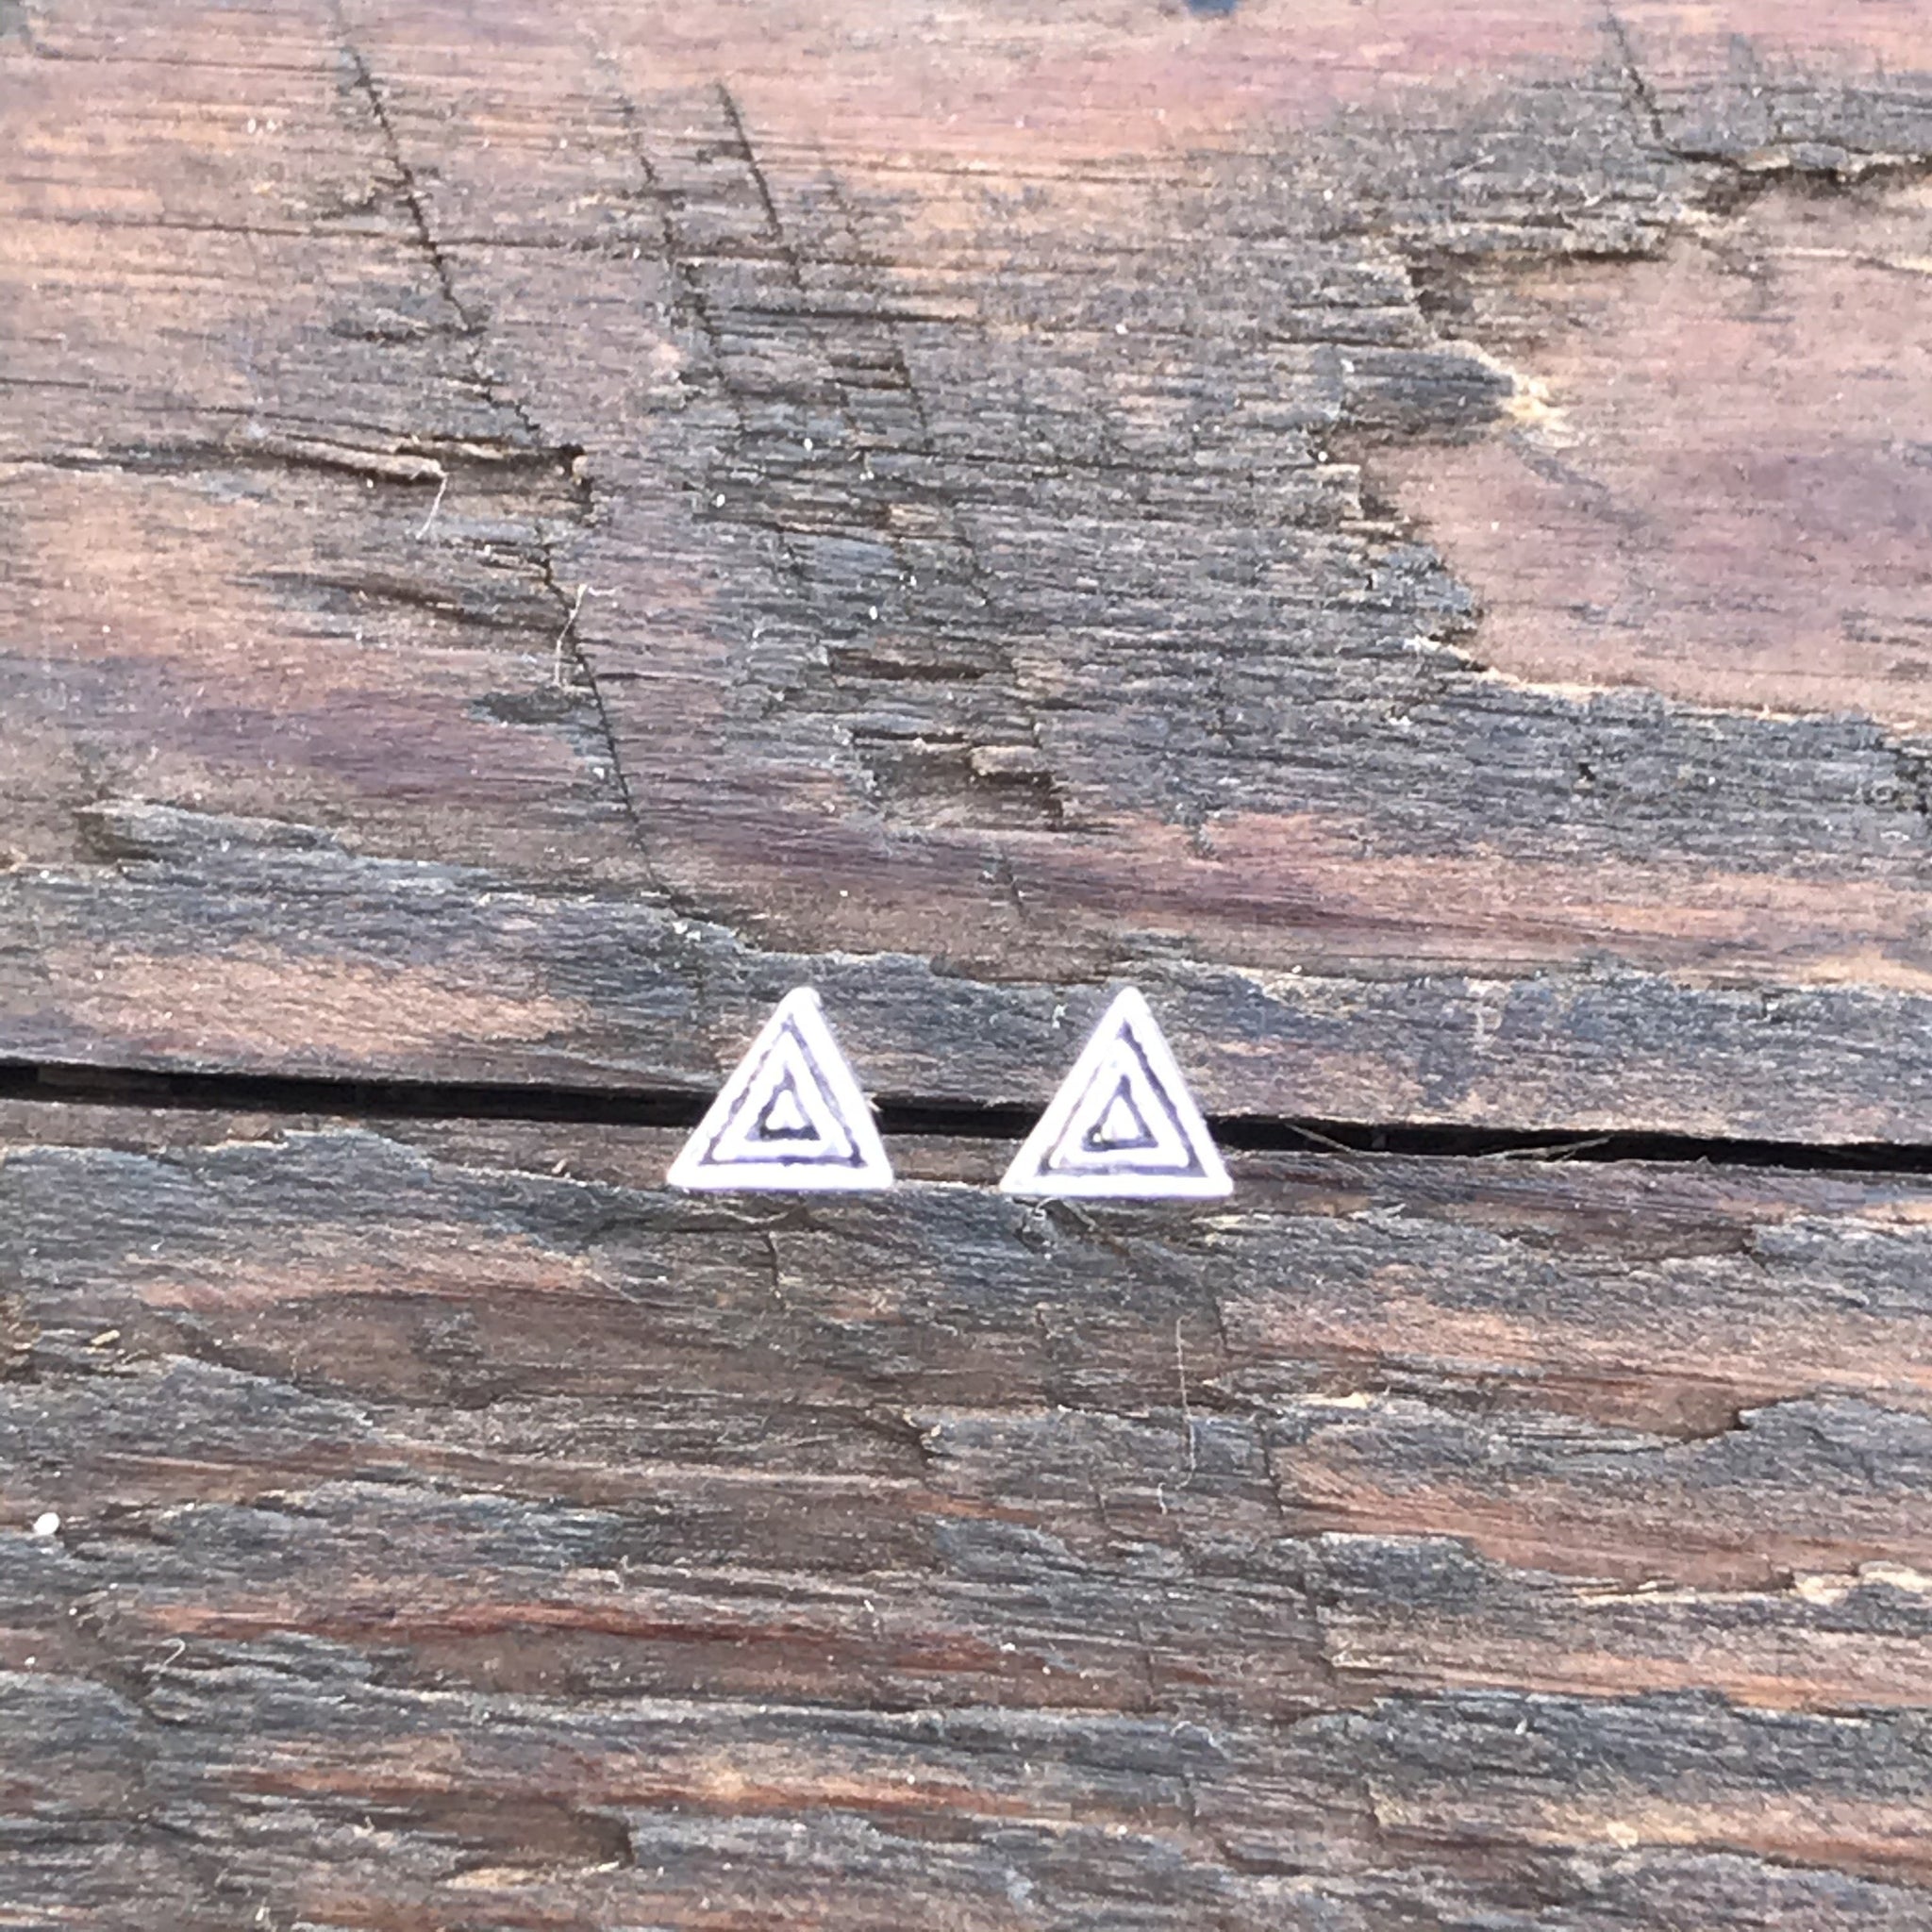 Sterling Silver 'Etched Triangle' Design Stud Earrings